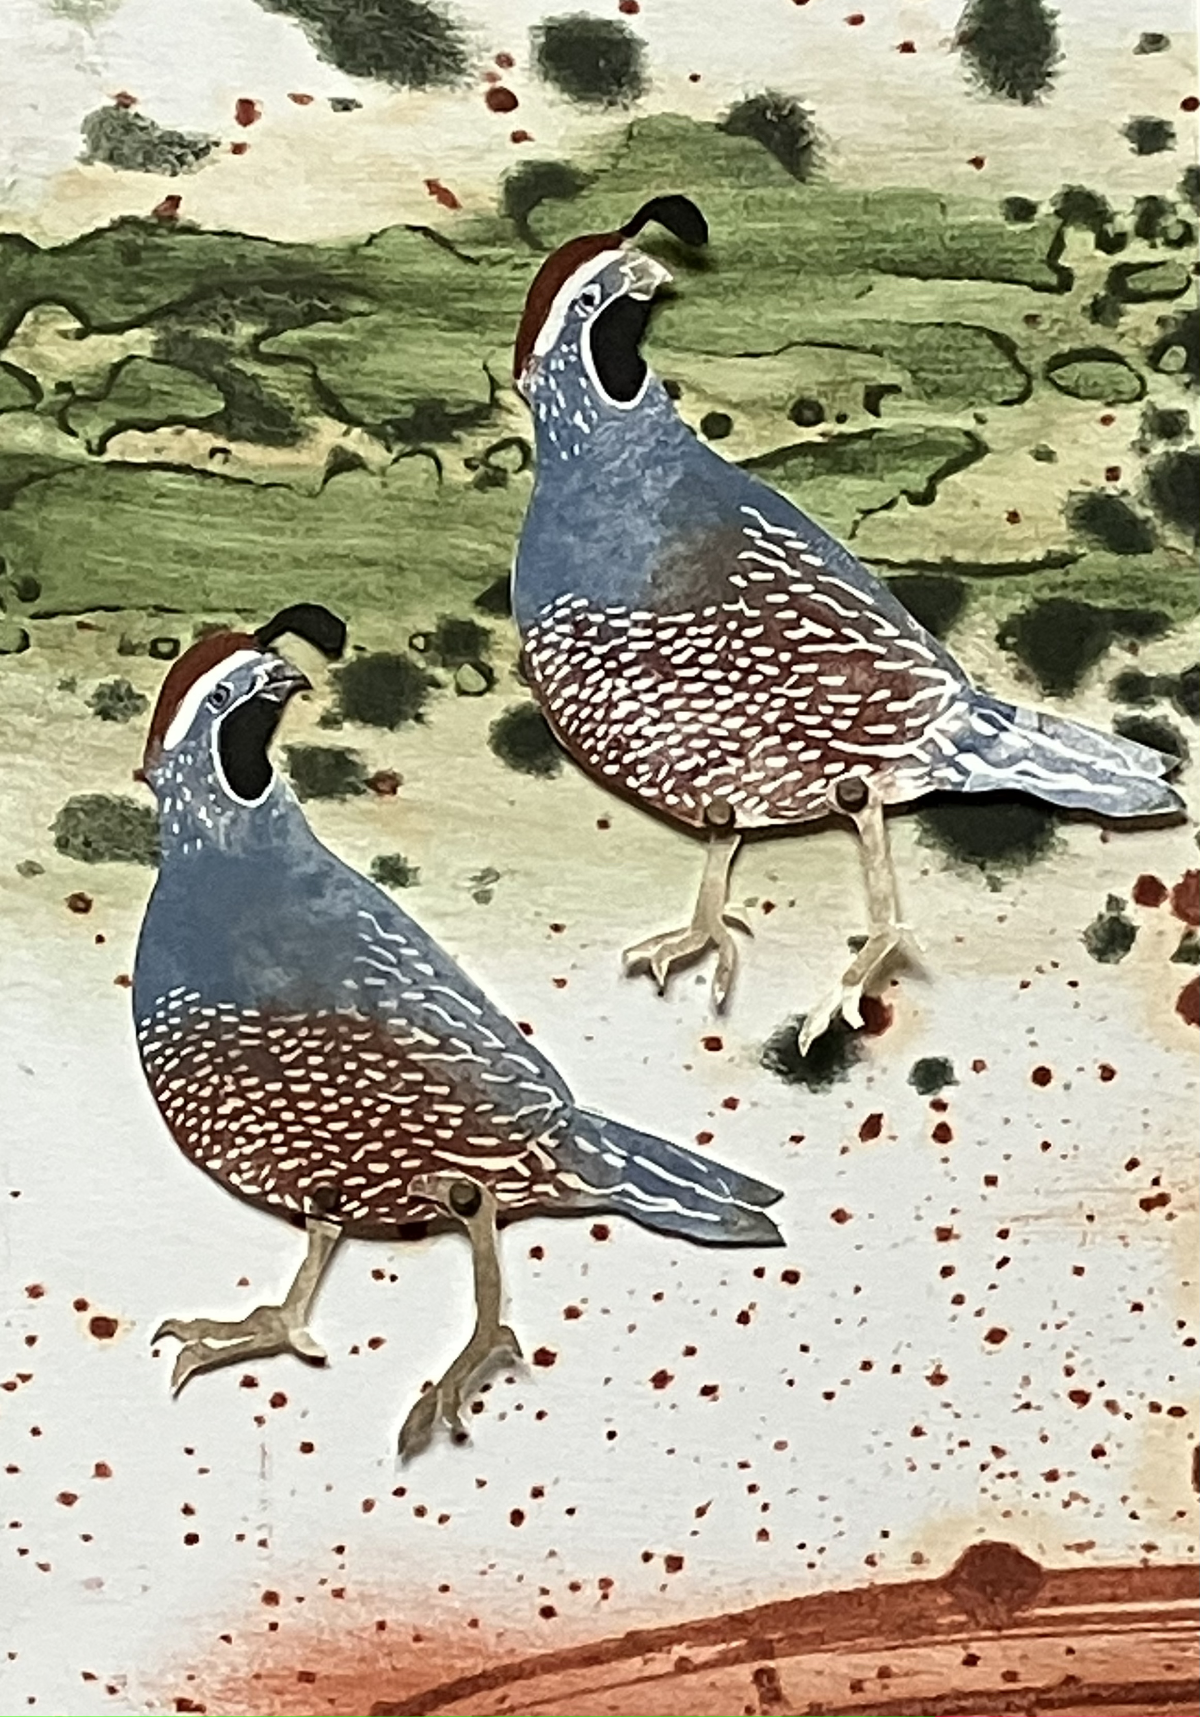 painting of two quail in a landscape